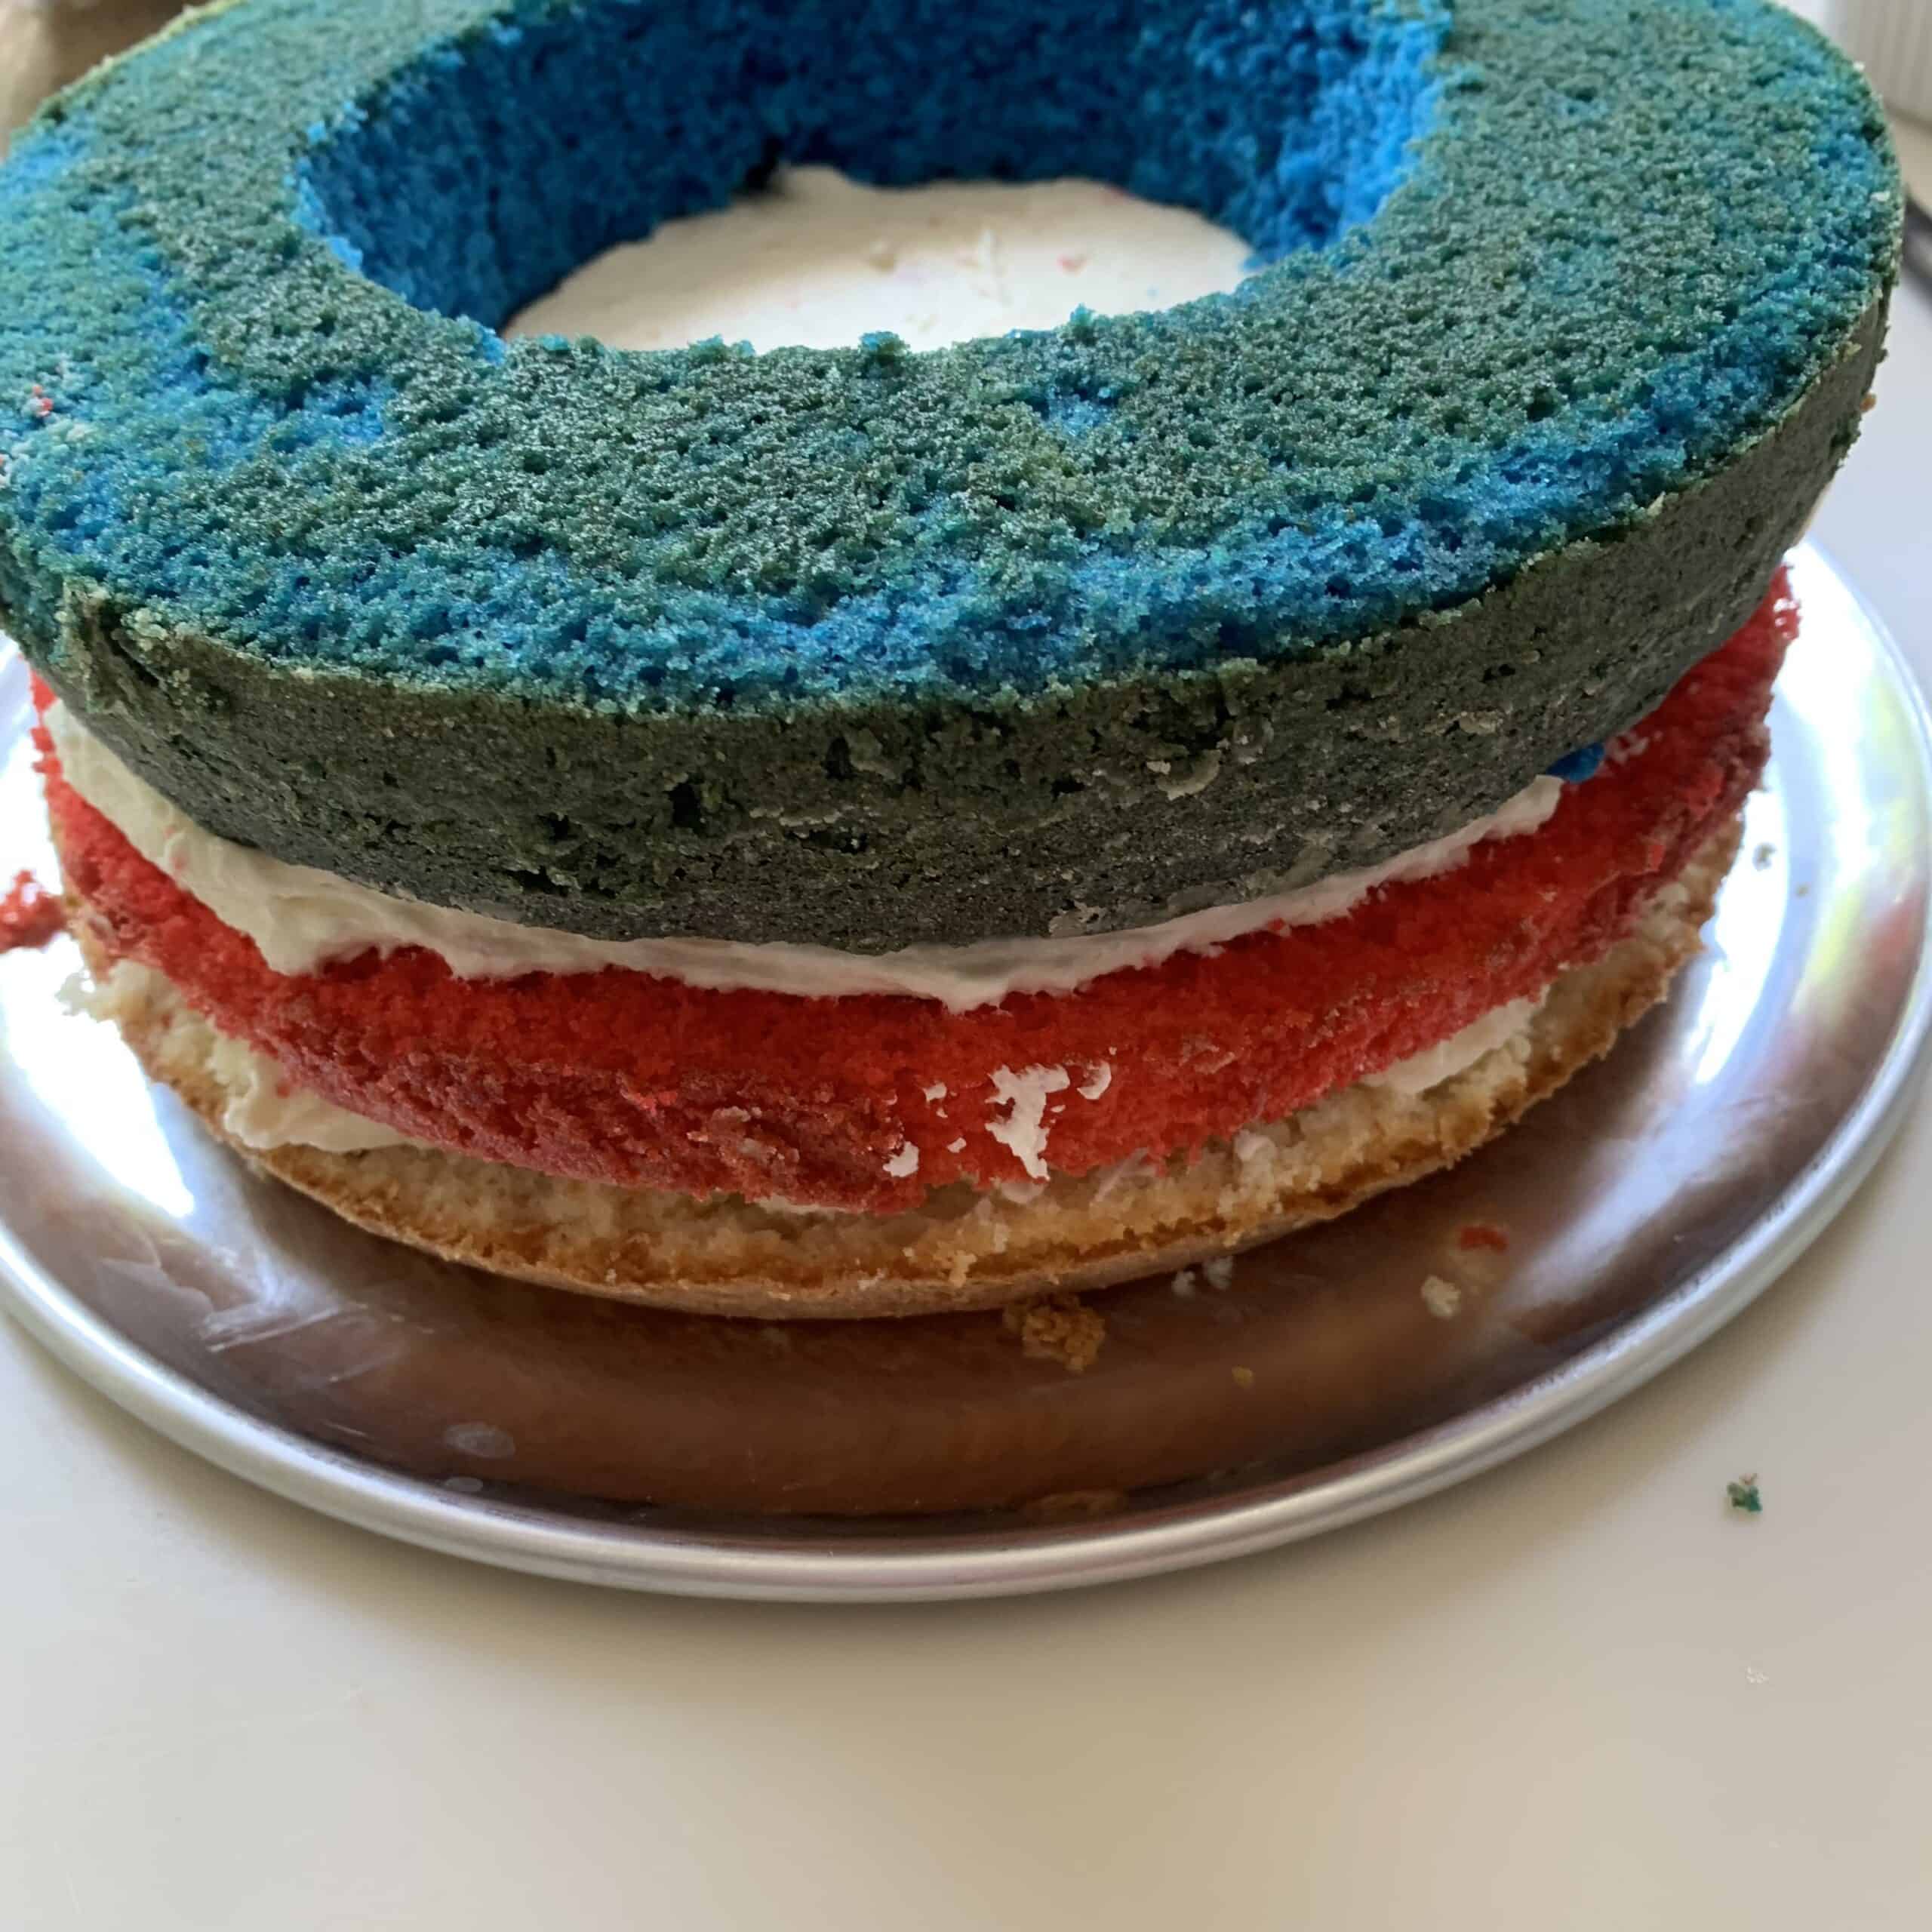 layers of cake: white topped by red topped by blue cake ring layer